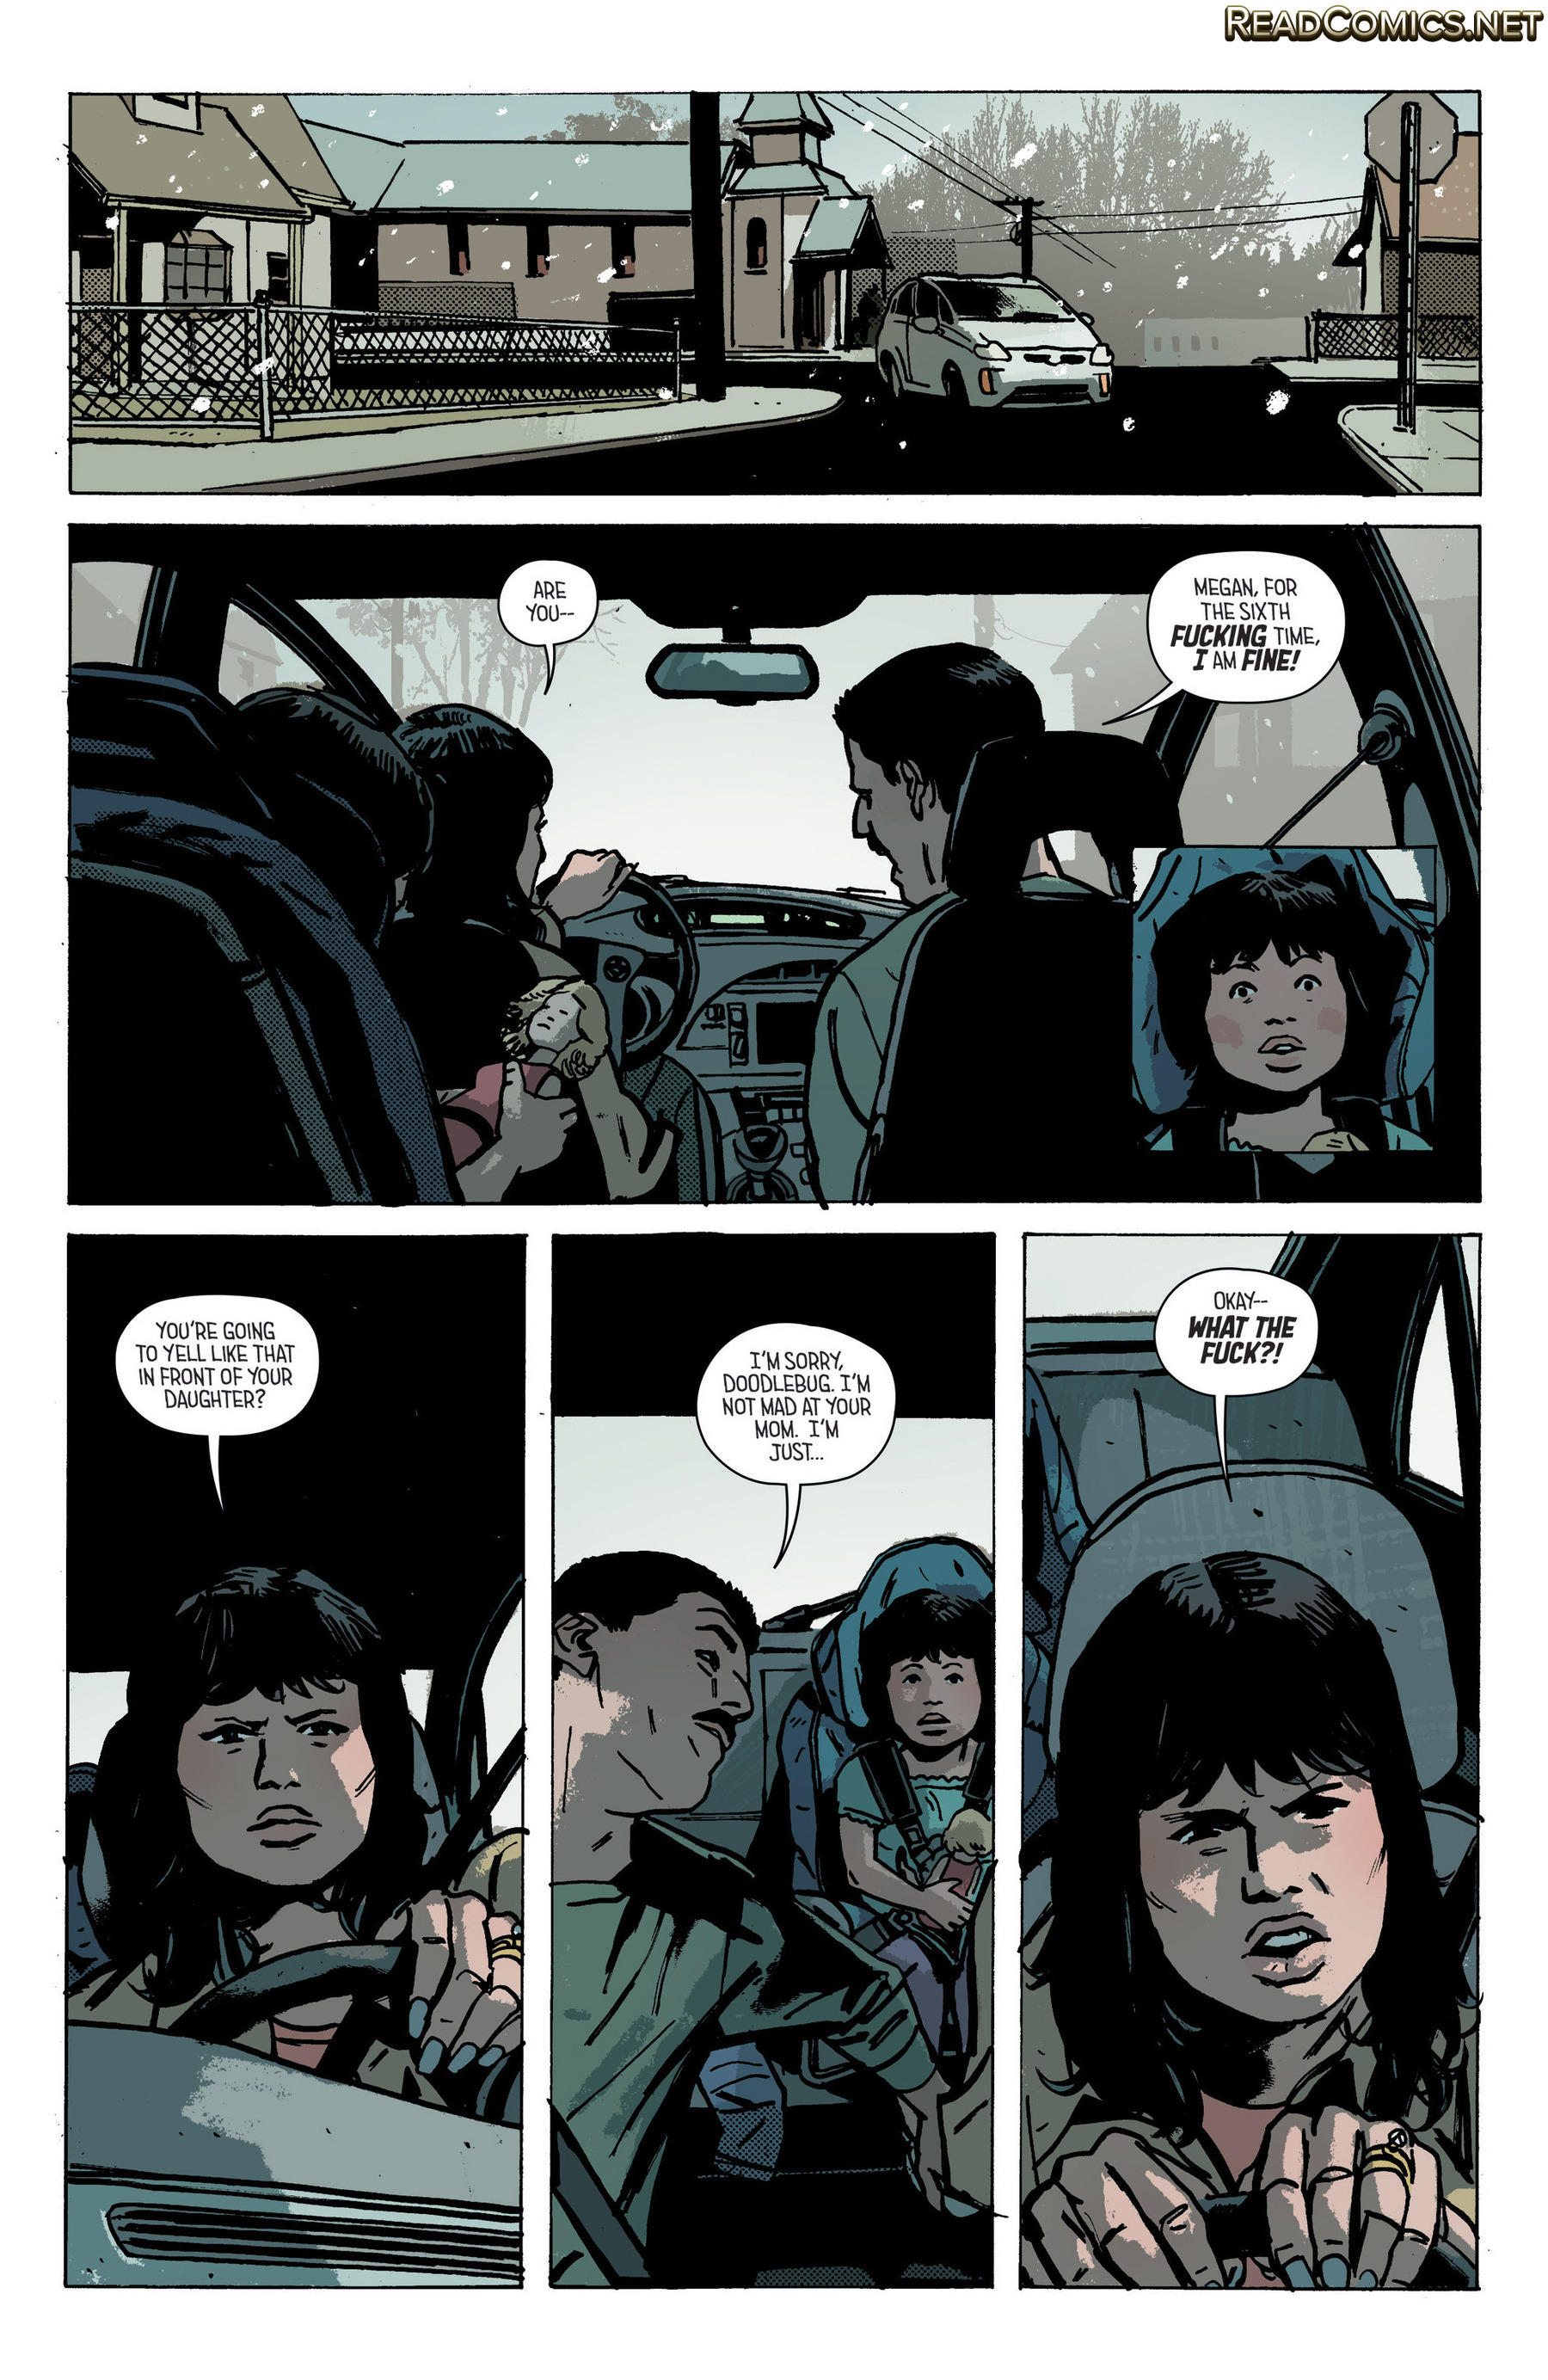 Outcast by Kirkman & Azaceta (2014-): Chapter 18 - Page 3